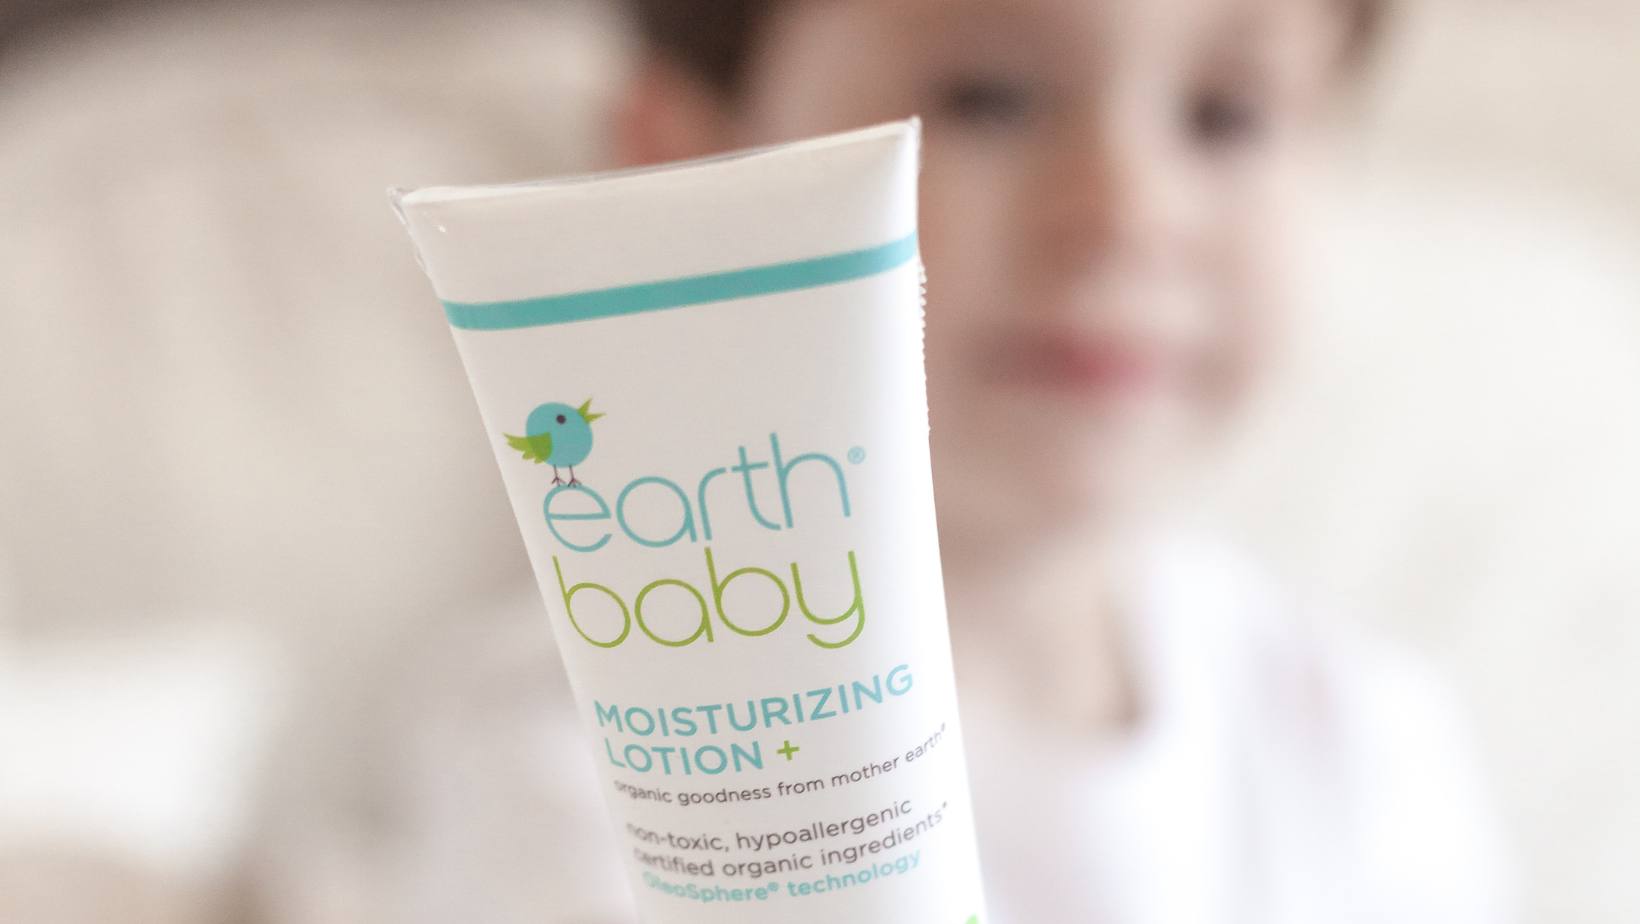 Embrace the Comfort of Earth Baby® Moisturizing Lotion + This Fall Season